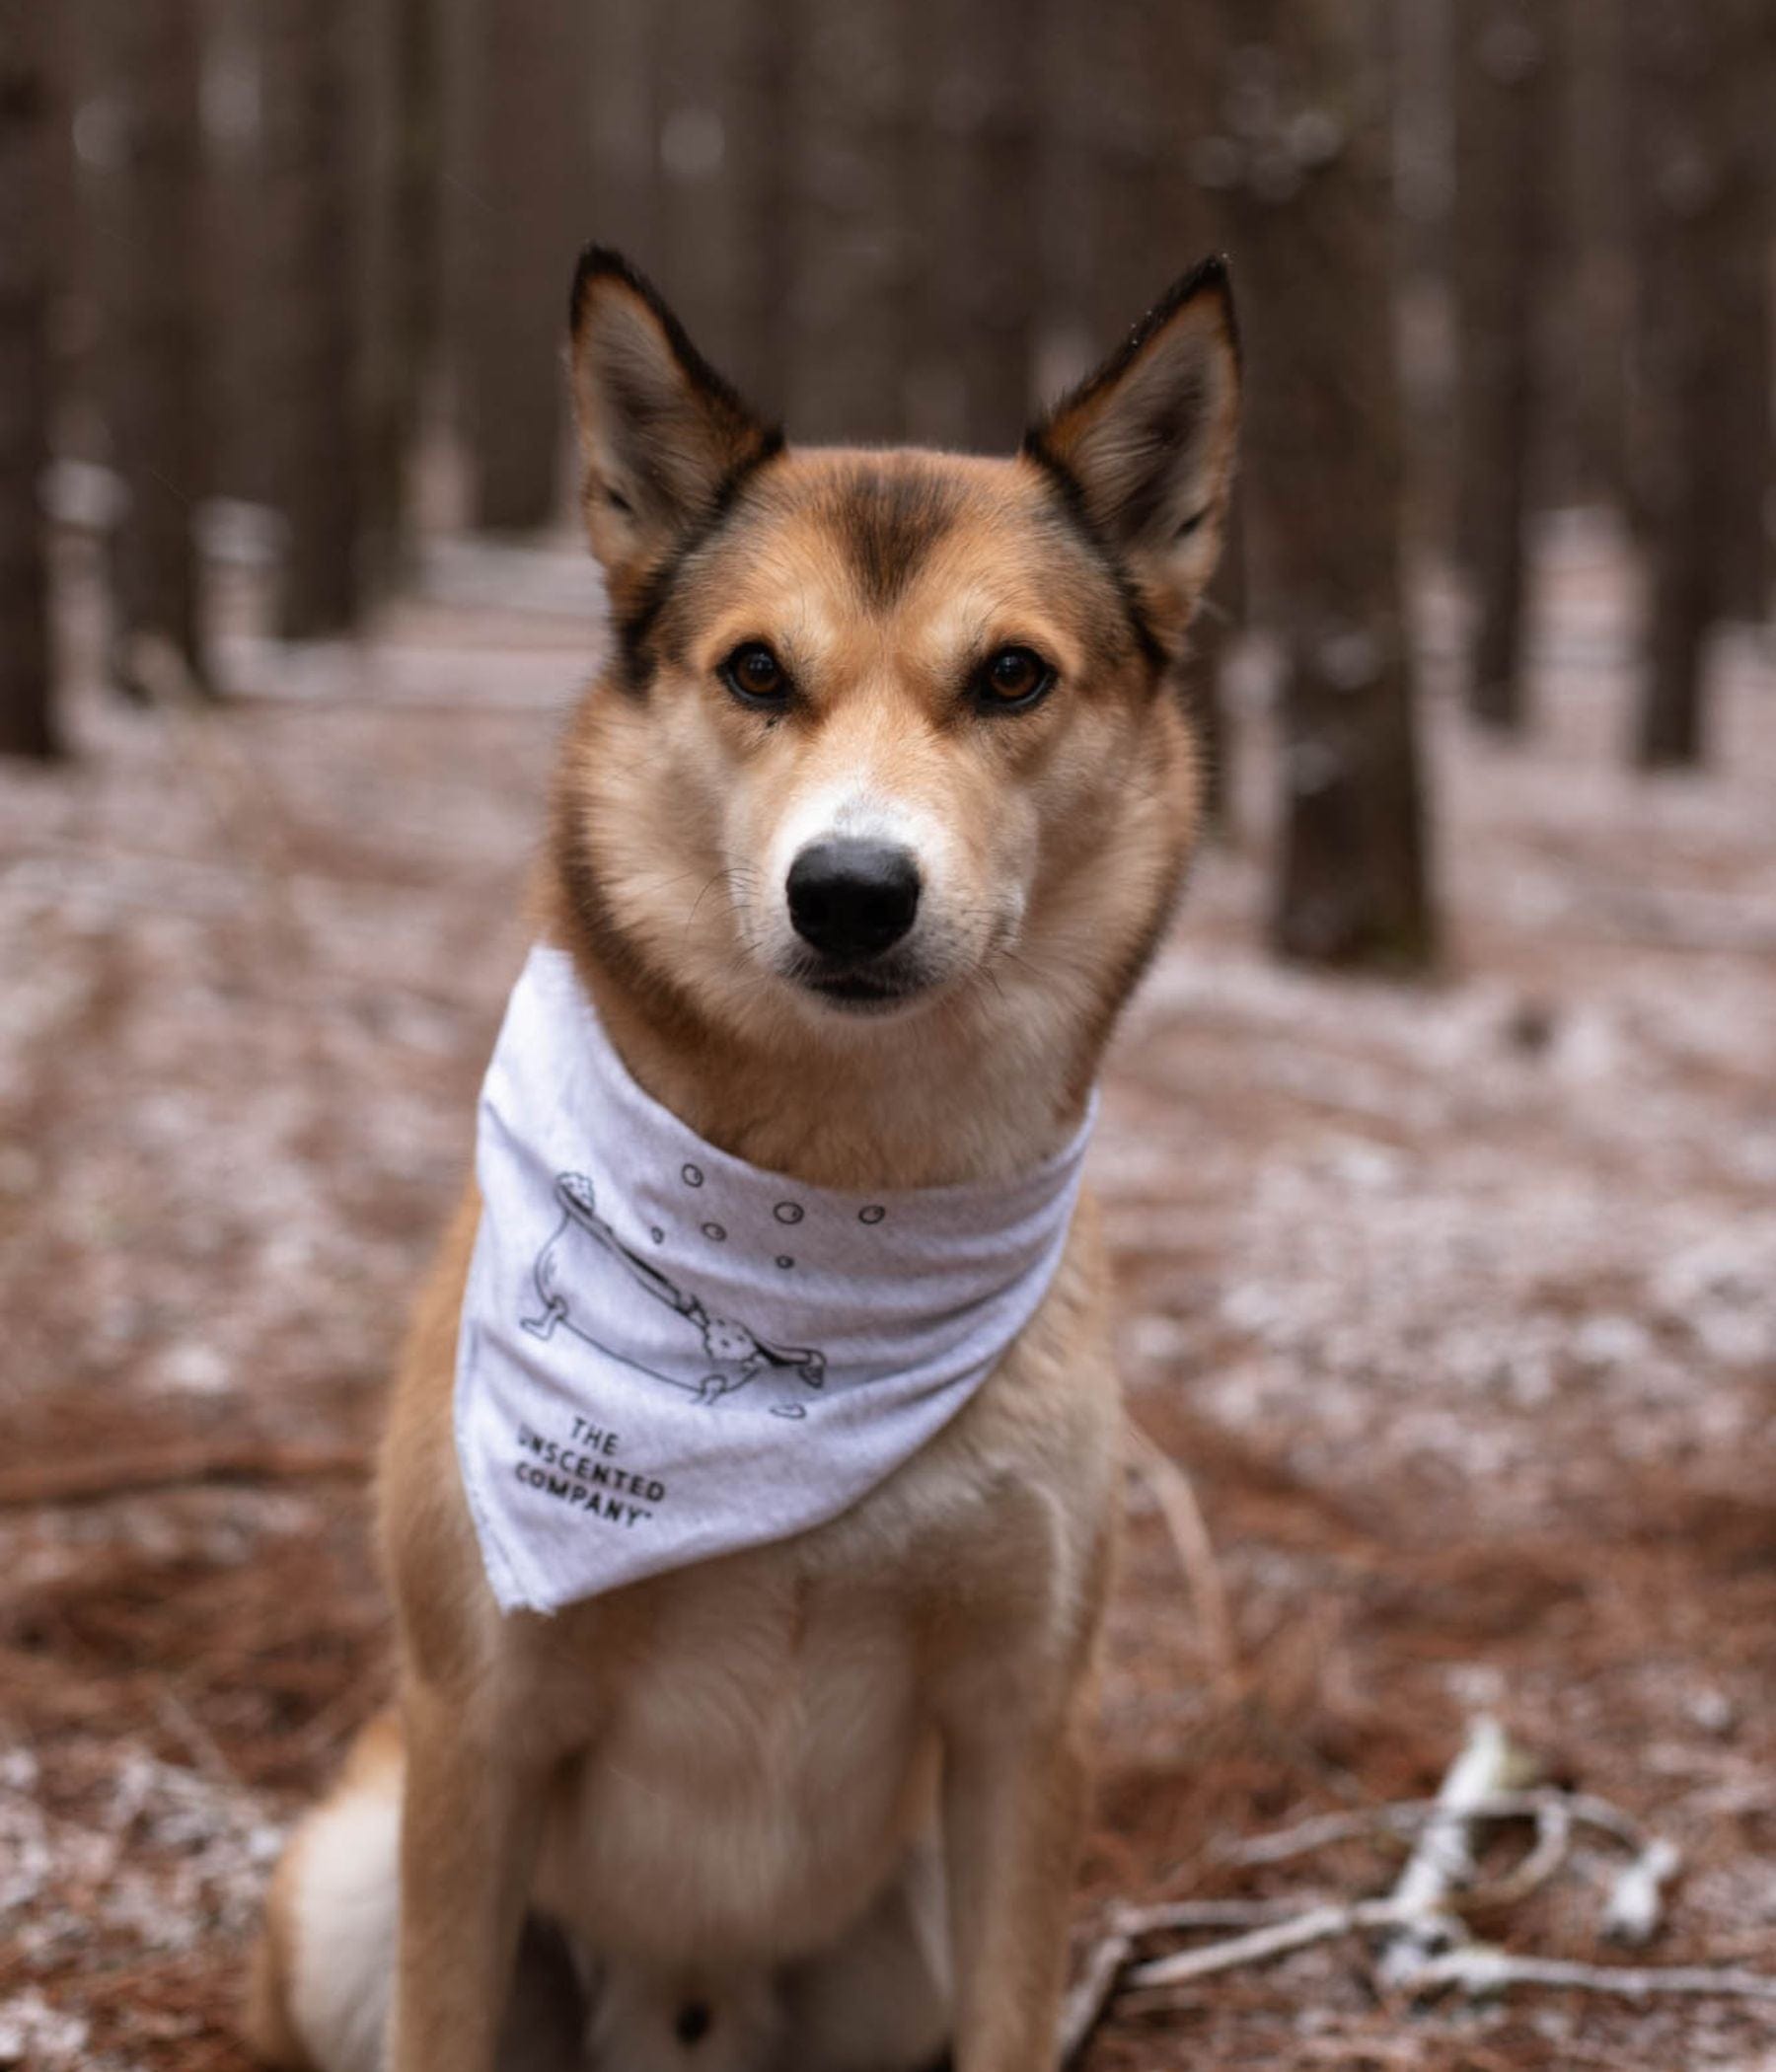 The Official Patch Bandana